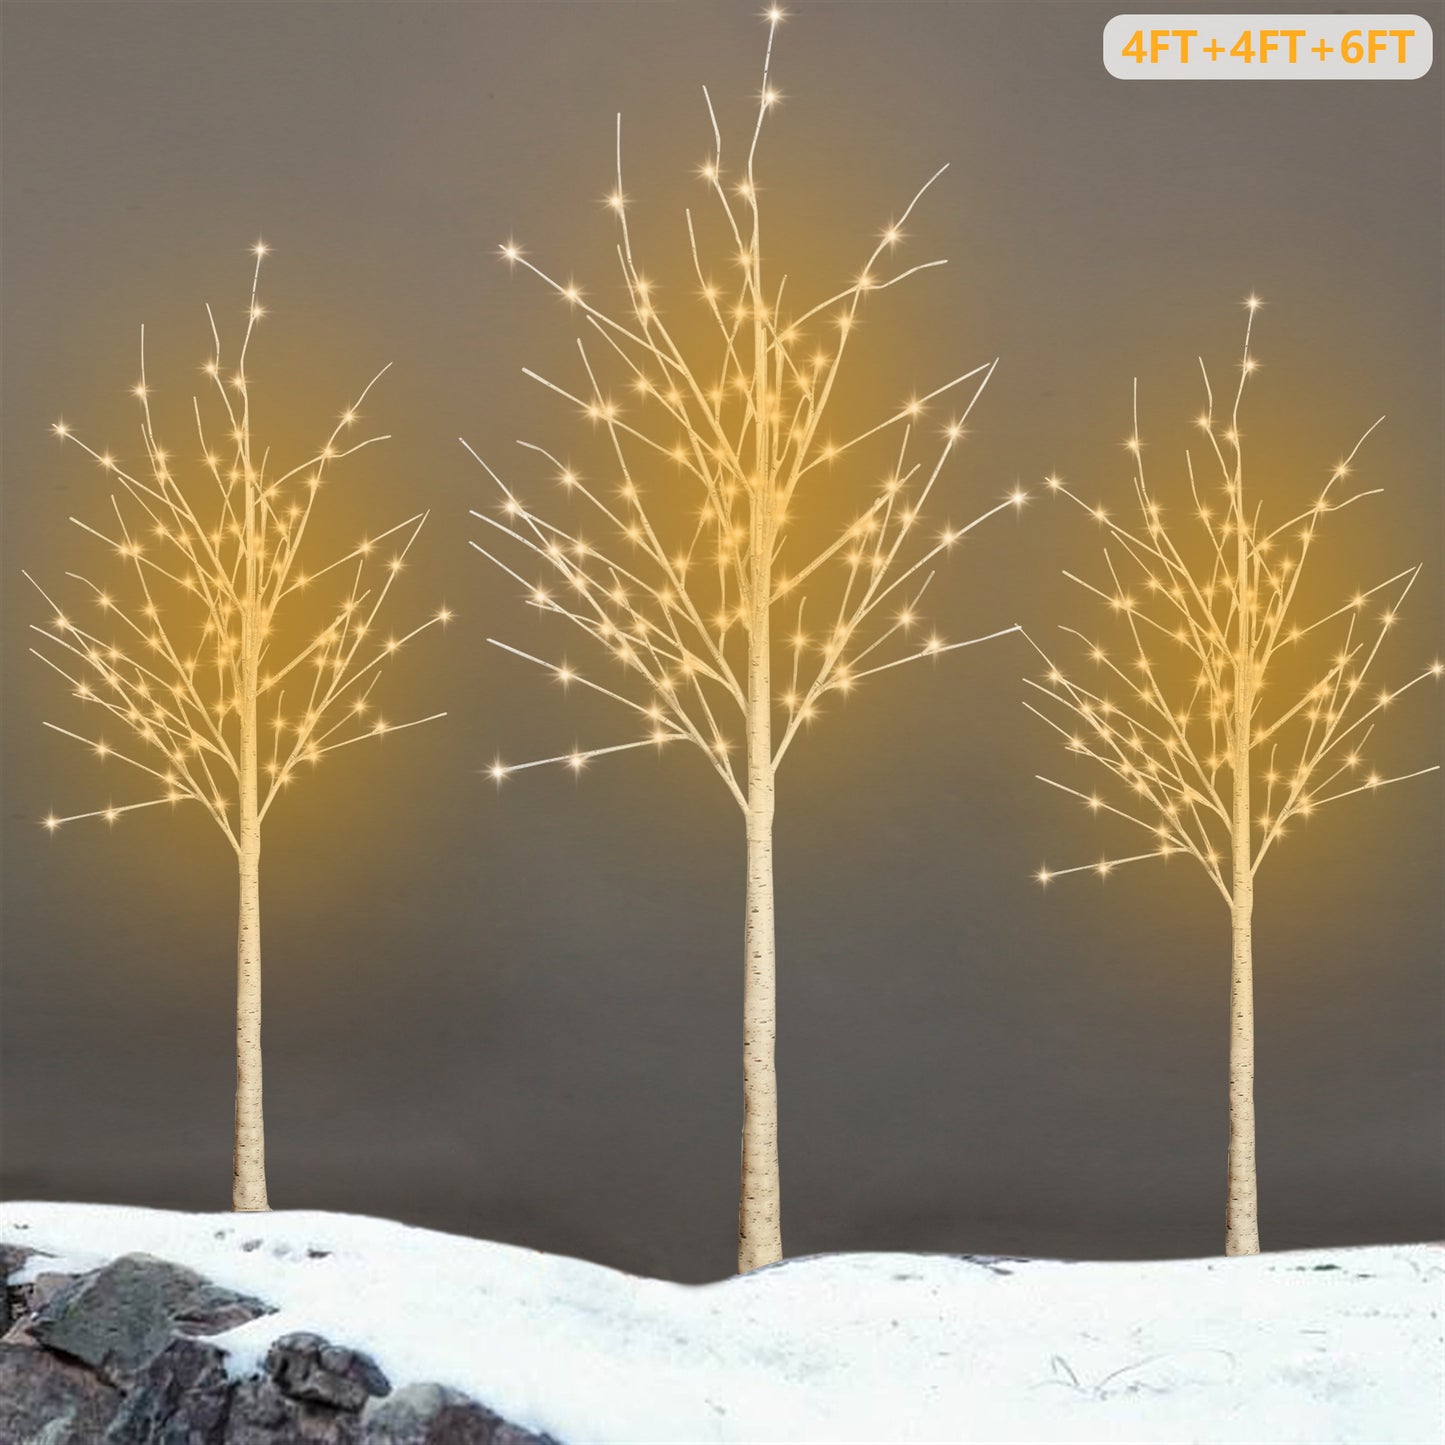 White Birch Trees, Set of 3, 4ft, 4ft and 6ft, Christmas Tree with LED Lights, Lighted Trees for Christmas Decoration, Home, Garden, Wedding, Festival Party, Indoor and Outdoor Use, Warm White, D4007